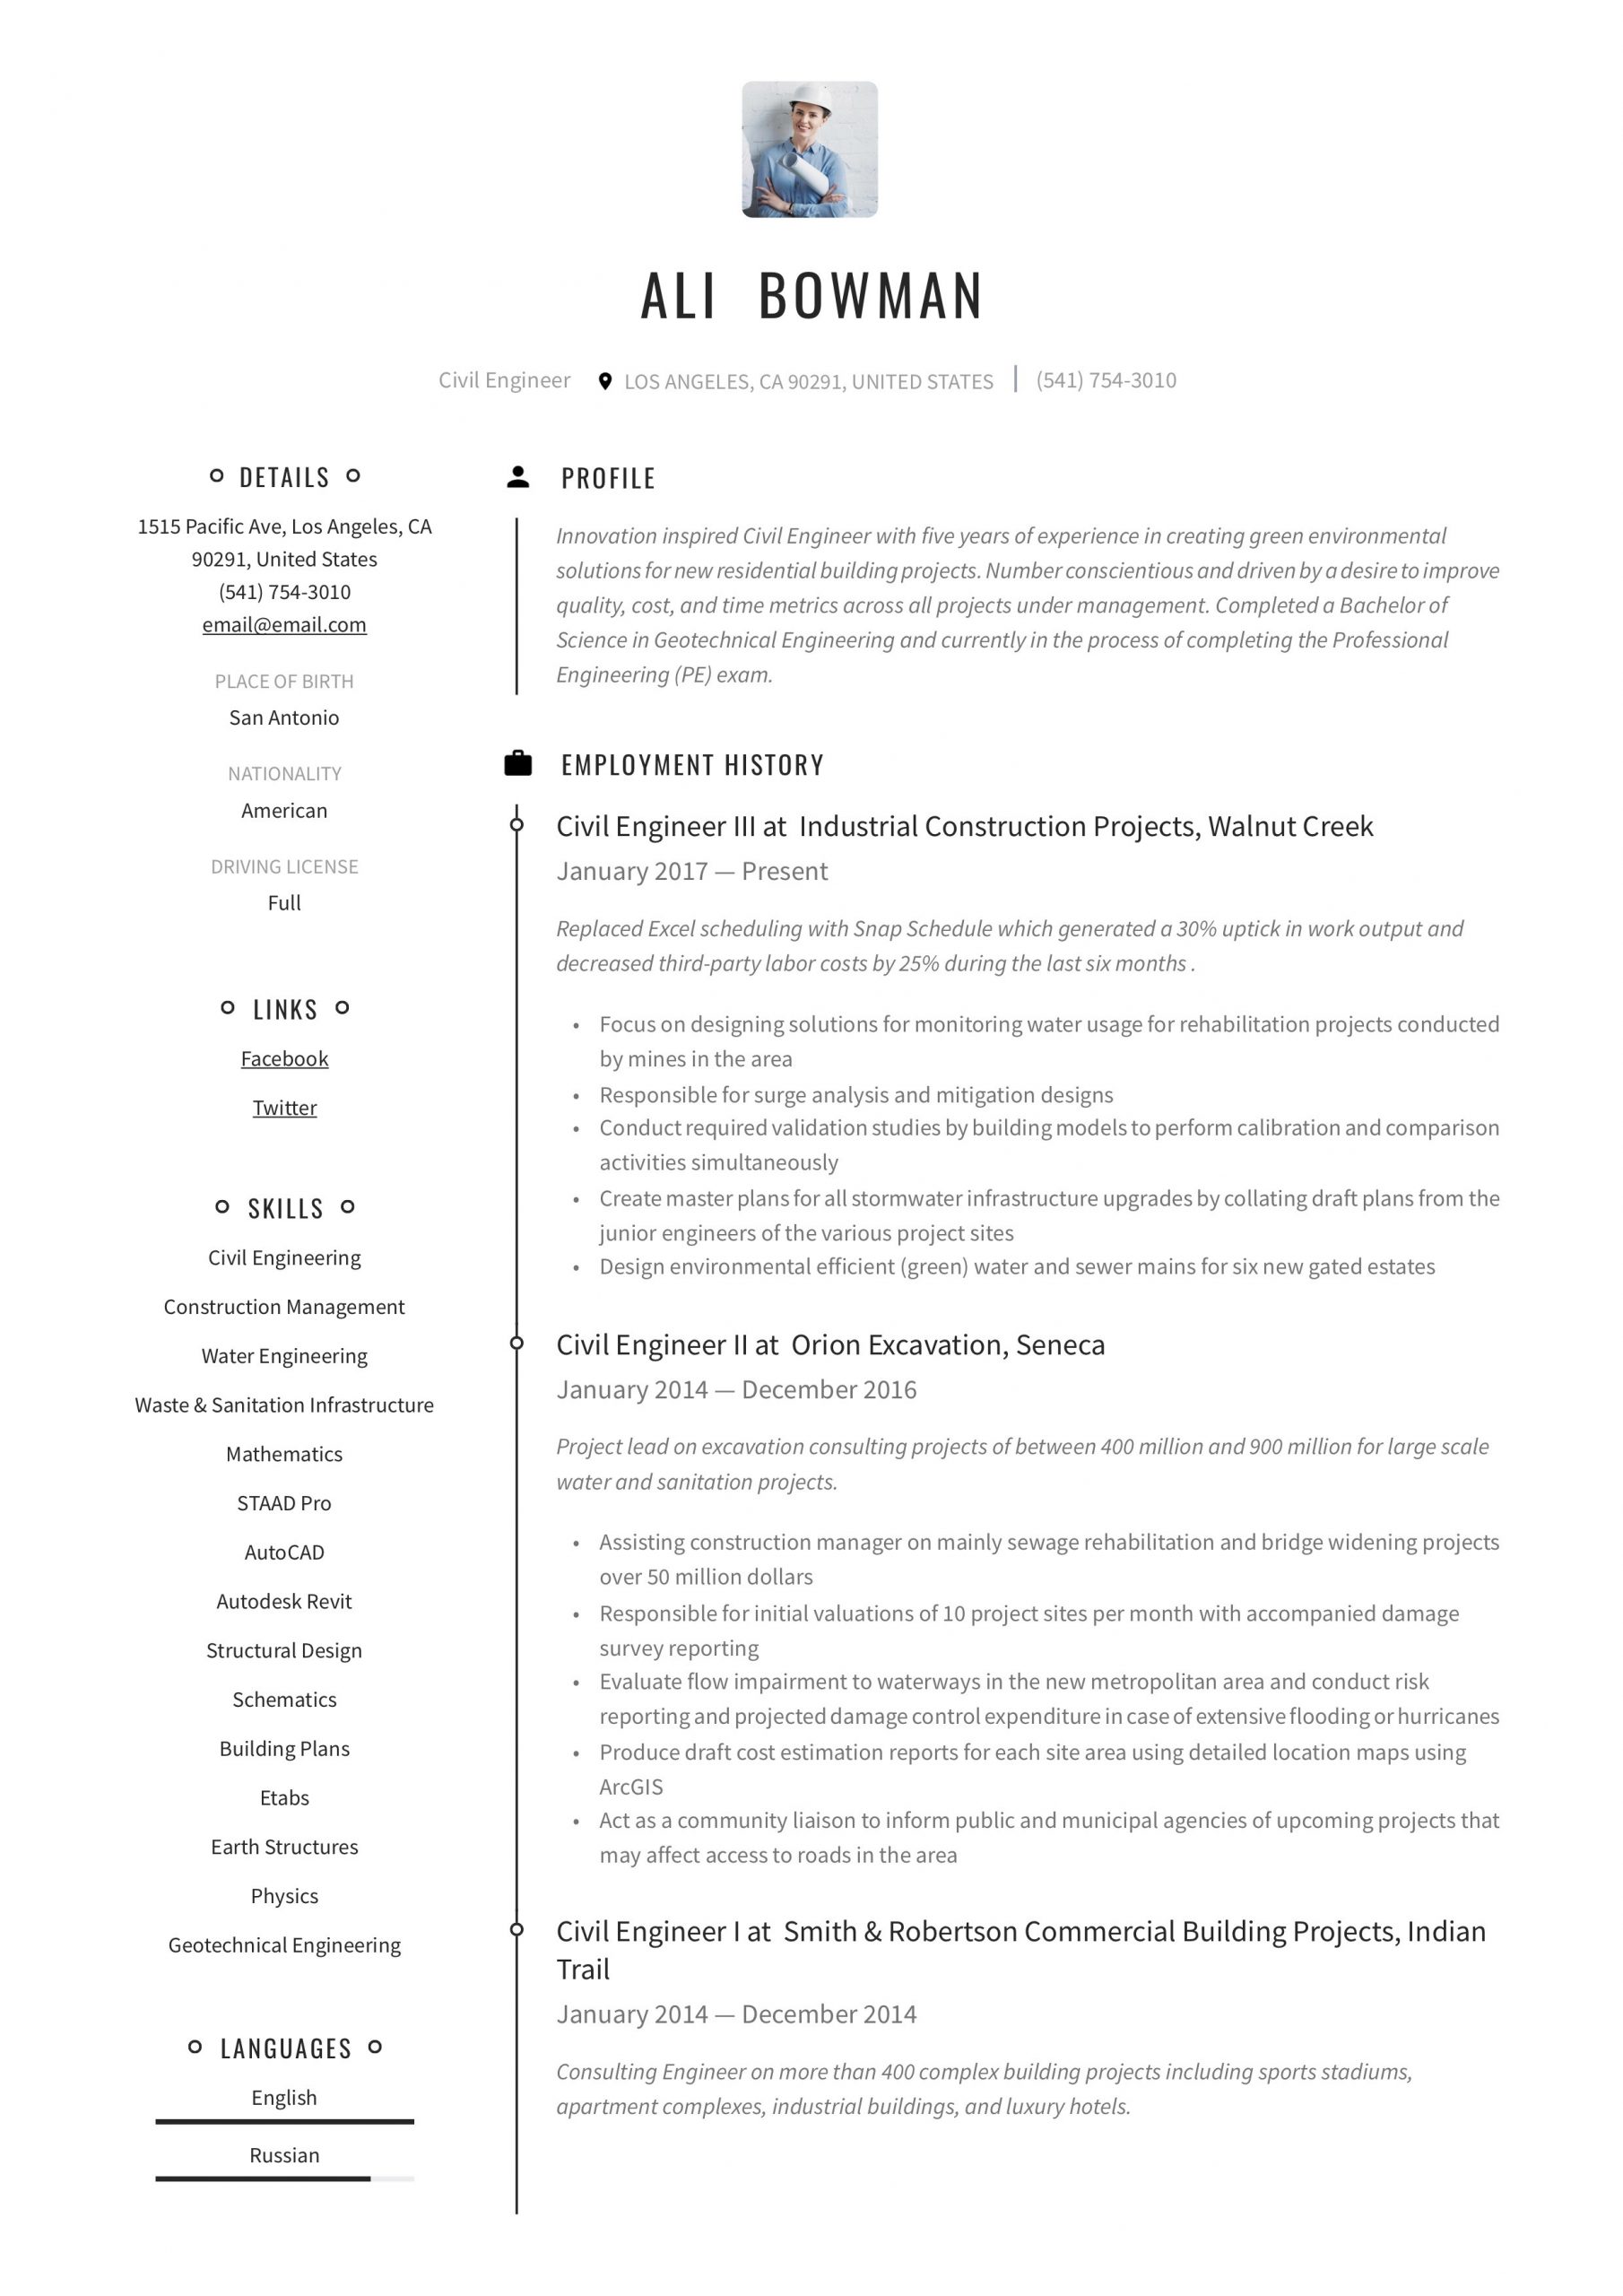 Free Resume Templates for Civil Engineers Civil Engineer Resume & Writing Guide  12 Resume Templates 2020